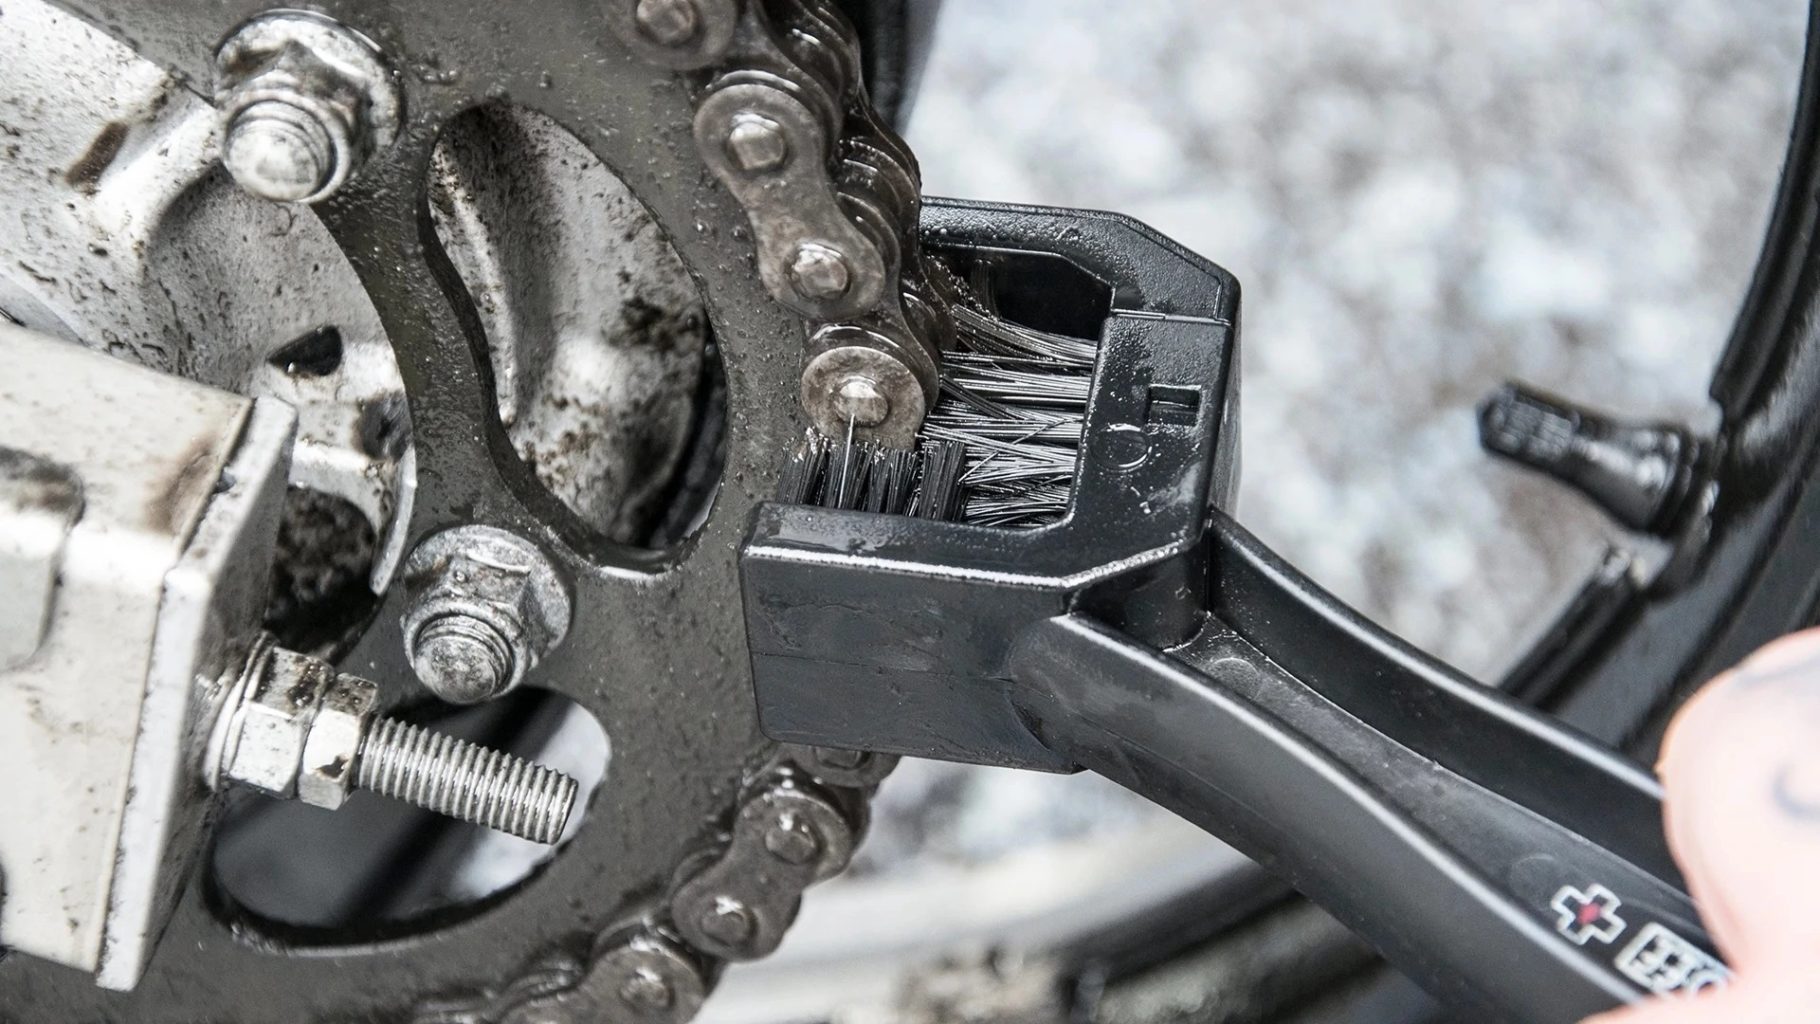 How to Clean Motorcycle Chain